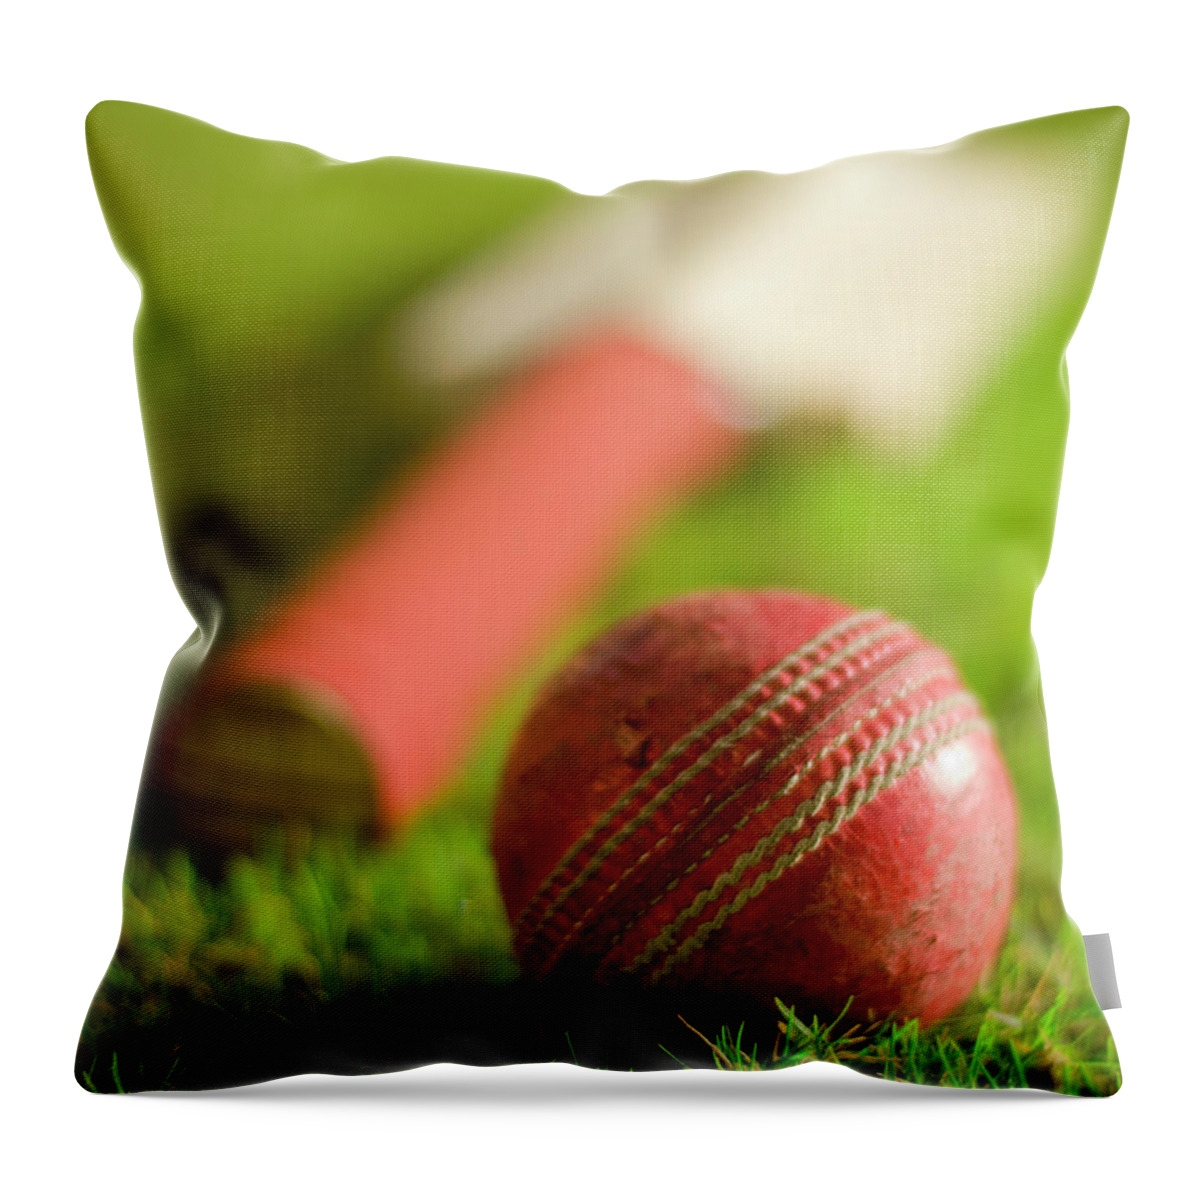 Grass Throw Pillow featuring the photograph Cricket Ball And Bat by Haseeb Ahmed Khan